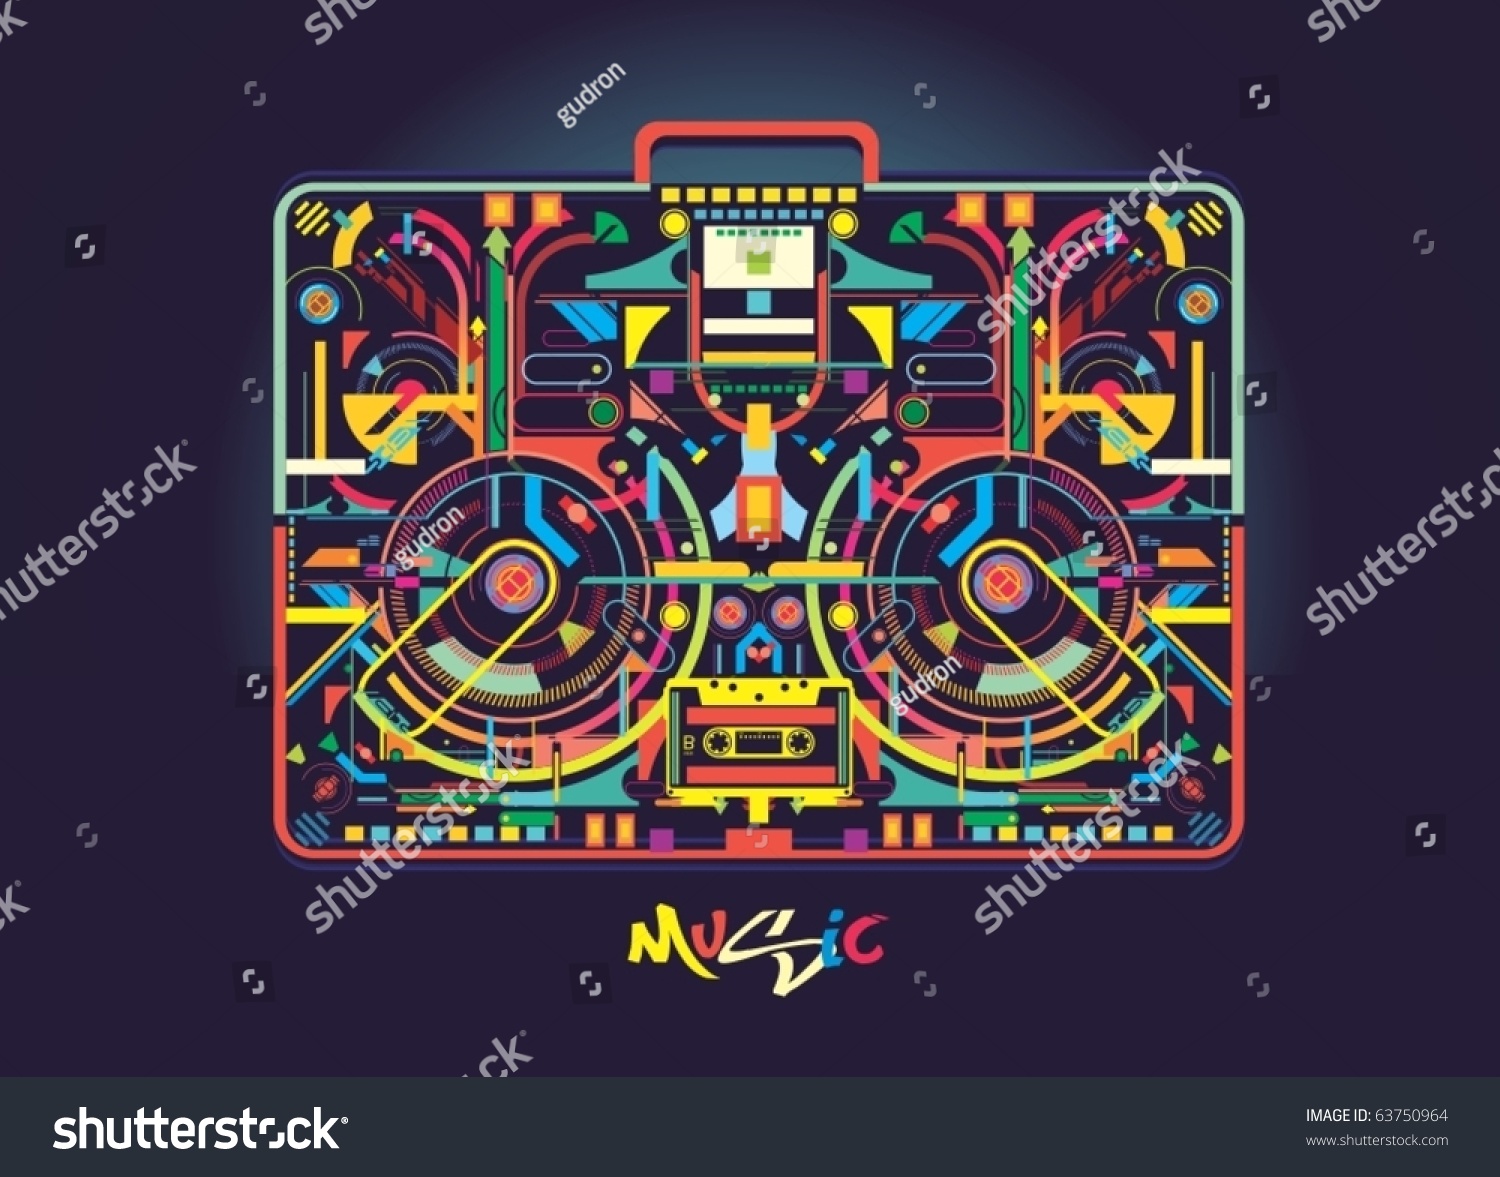 Boombox Illustration Created From Colorful Abstract Shapes,Vector ...